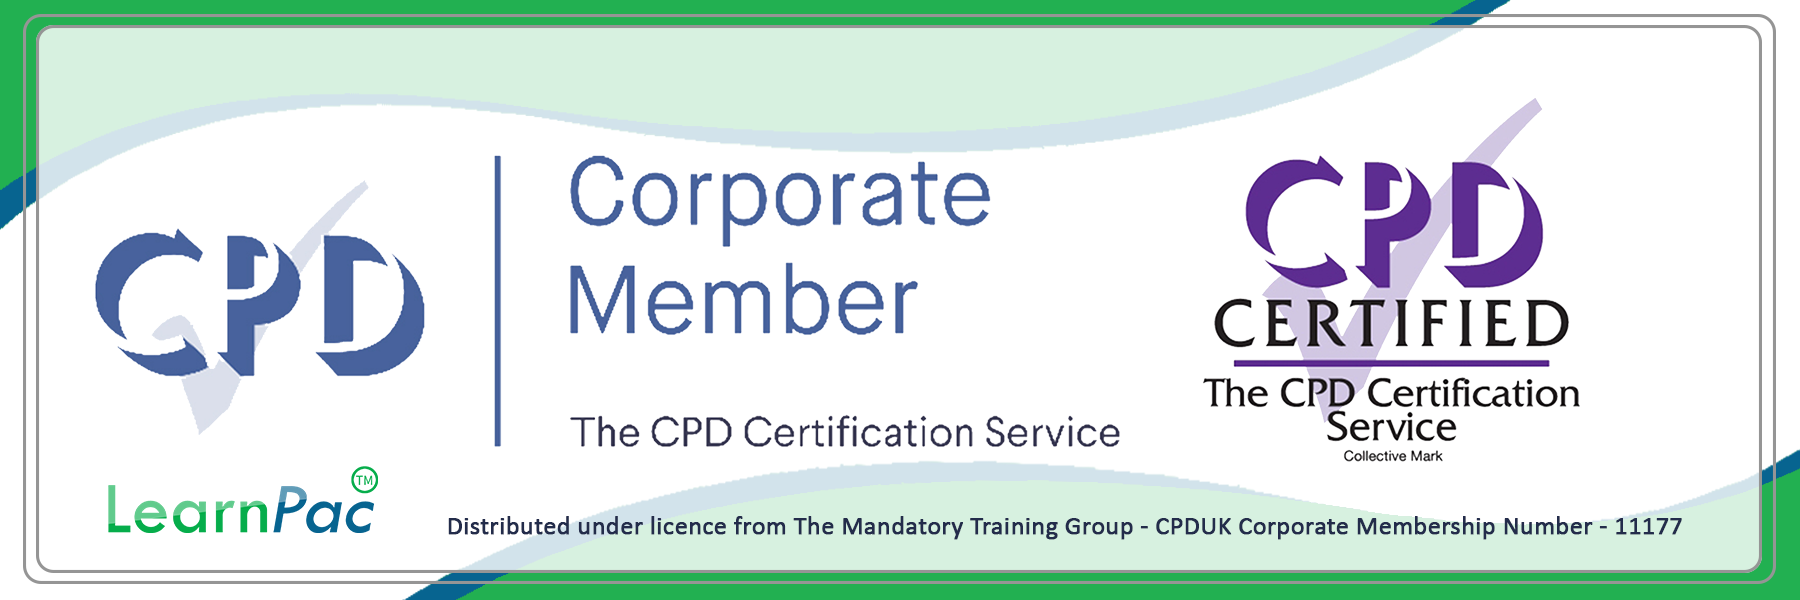 Autism Awareness - E-Learning Courses with Certificates - CPD Certified - LearnPac Systems UK -